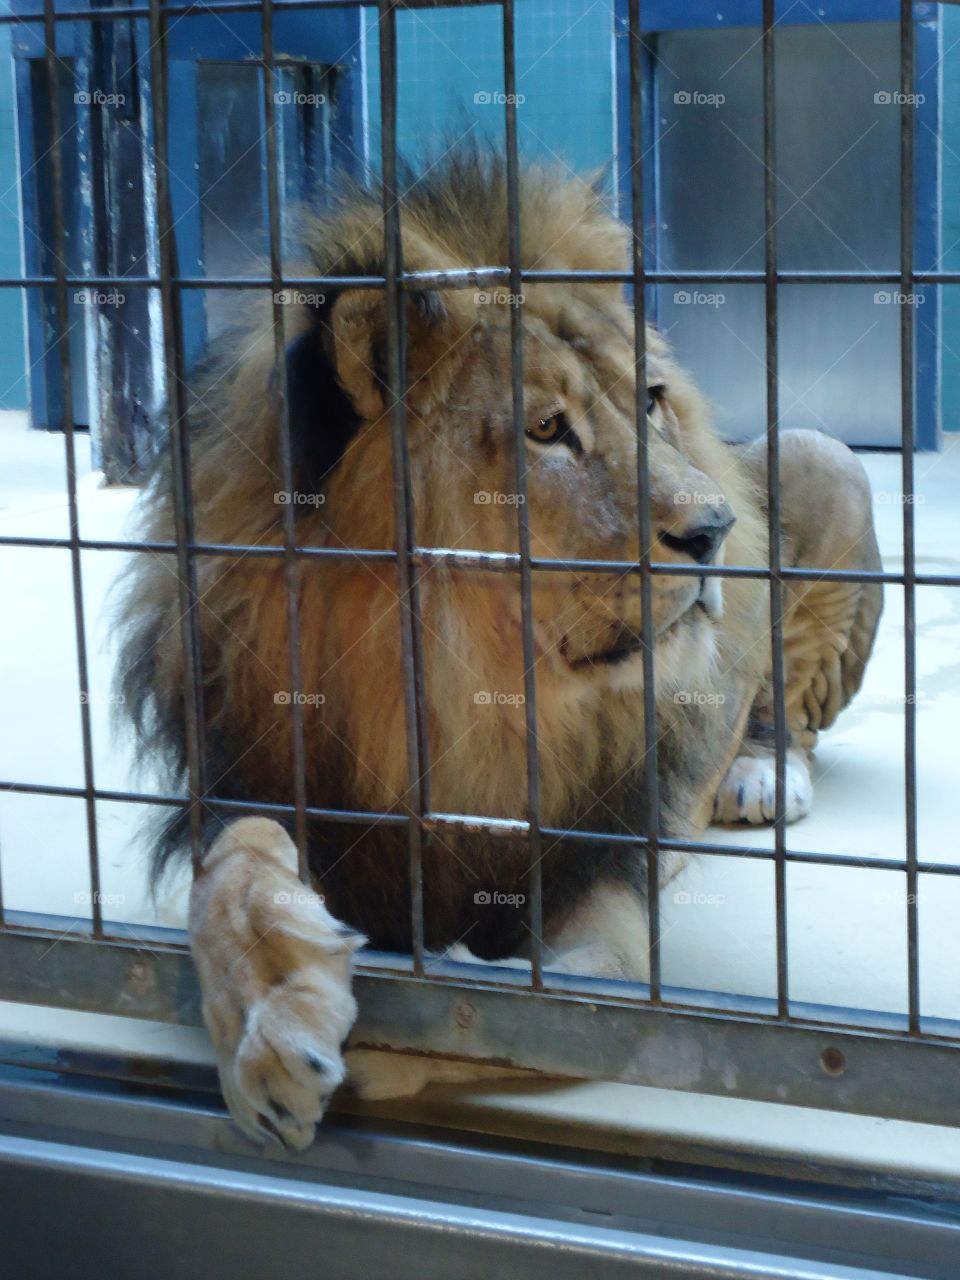 KING into the jail